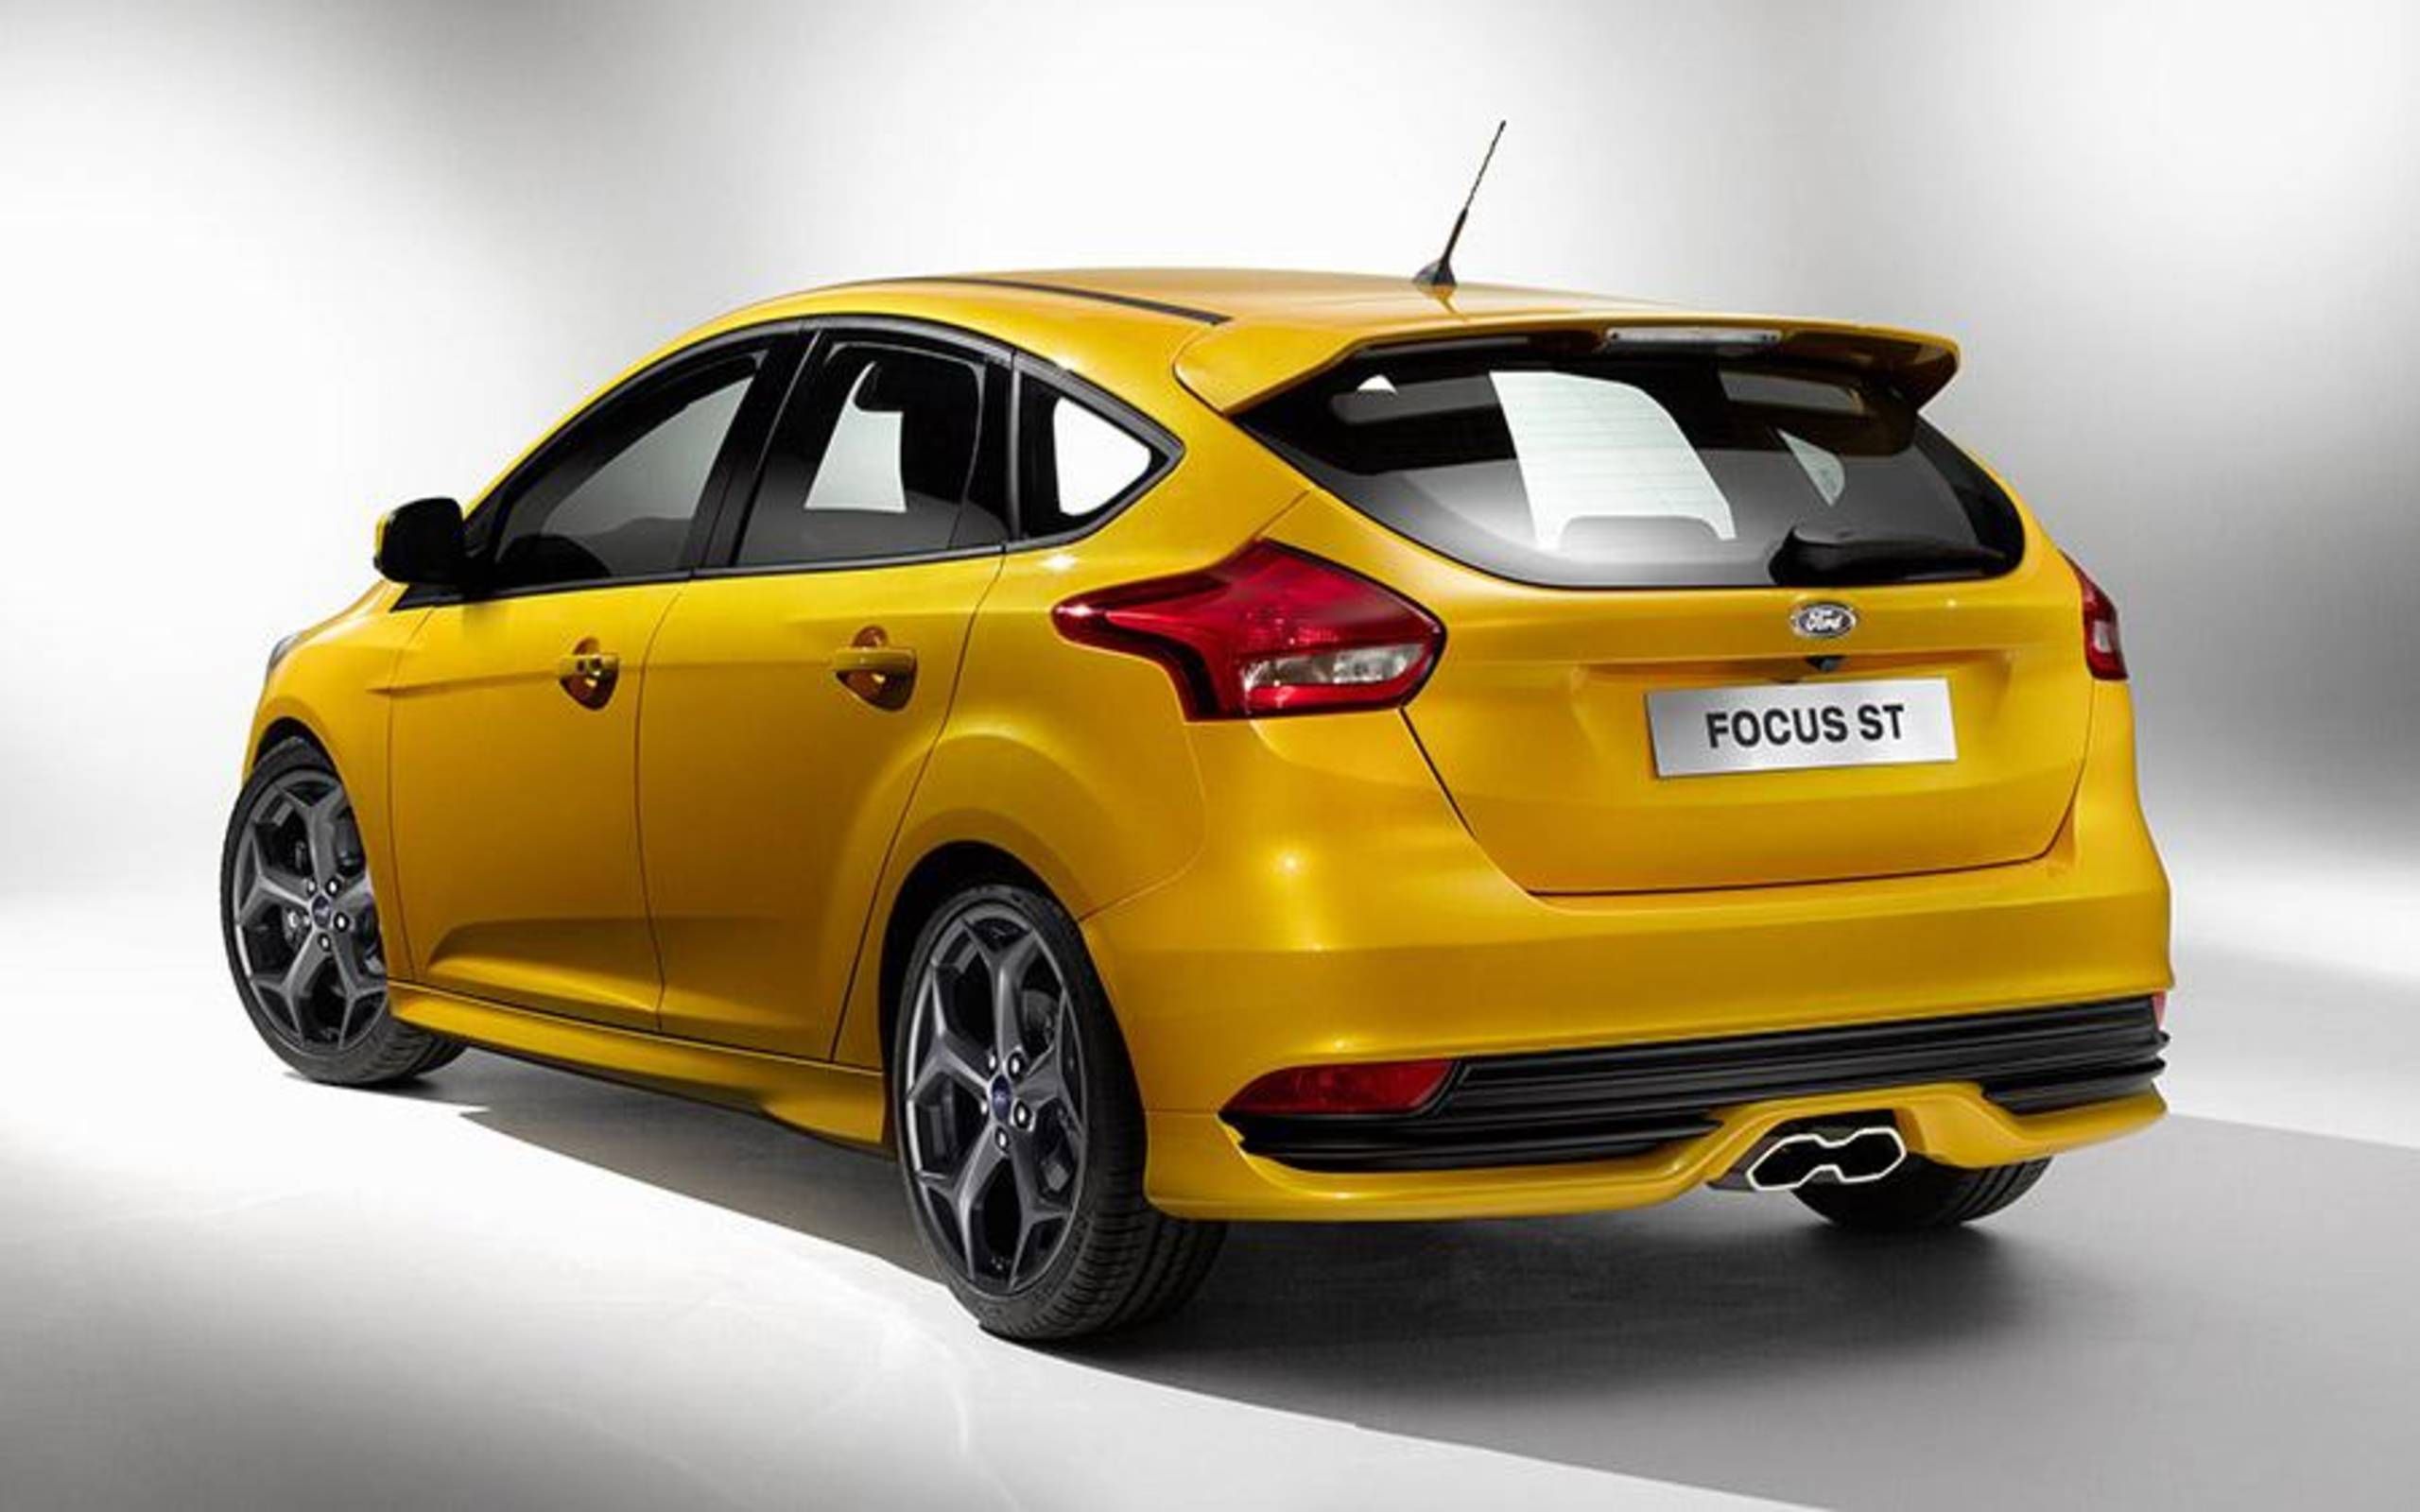 Meet the 2015 Ford Focus ST